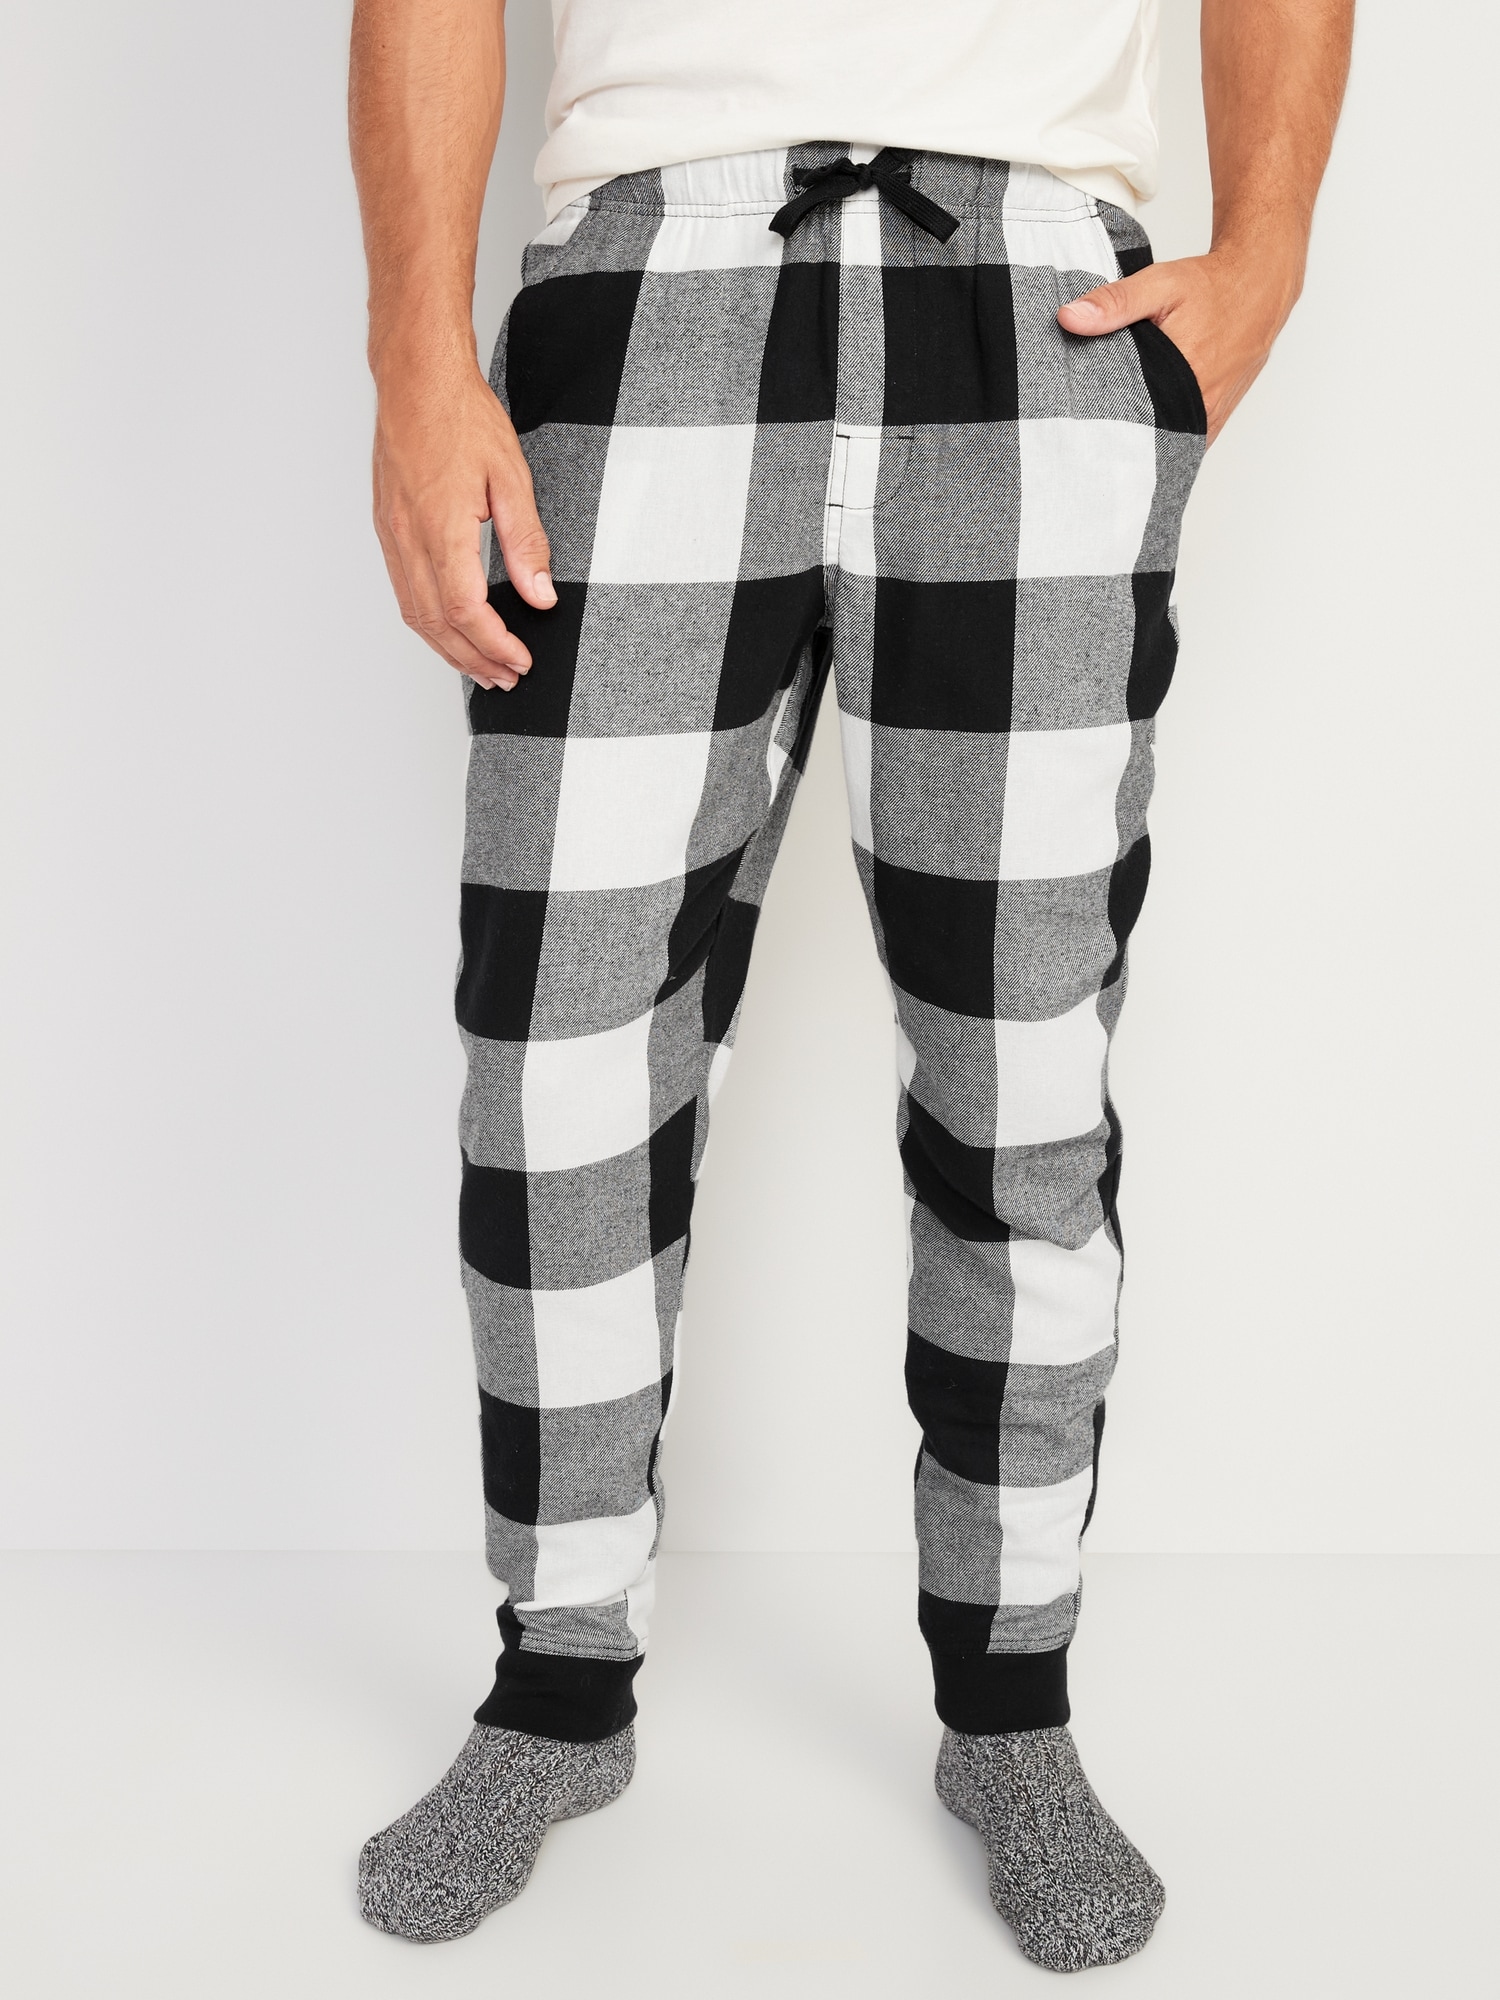 MidRise Printed Flannel Pajama Pants for Women  Old Navy